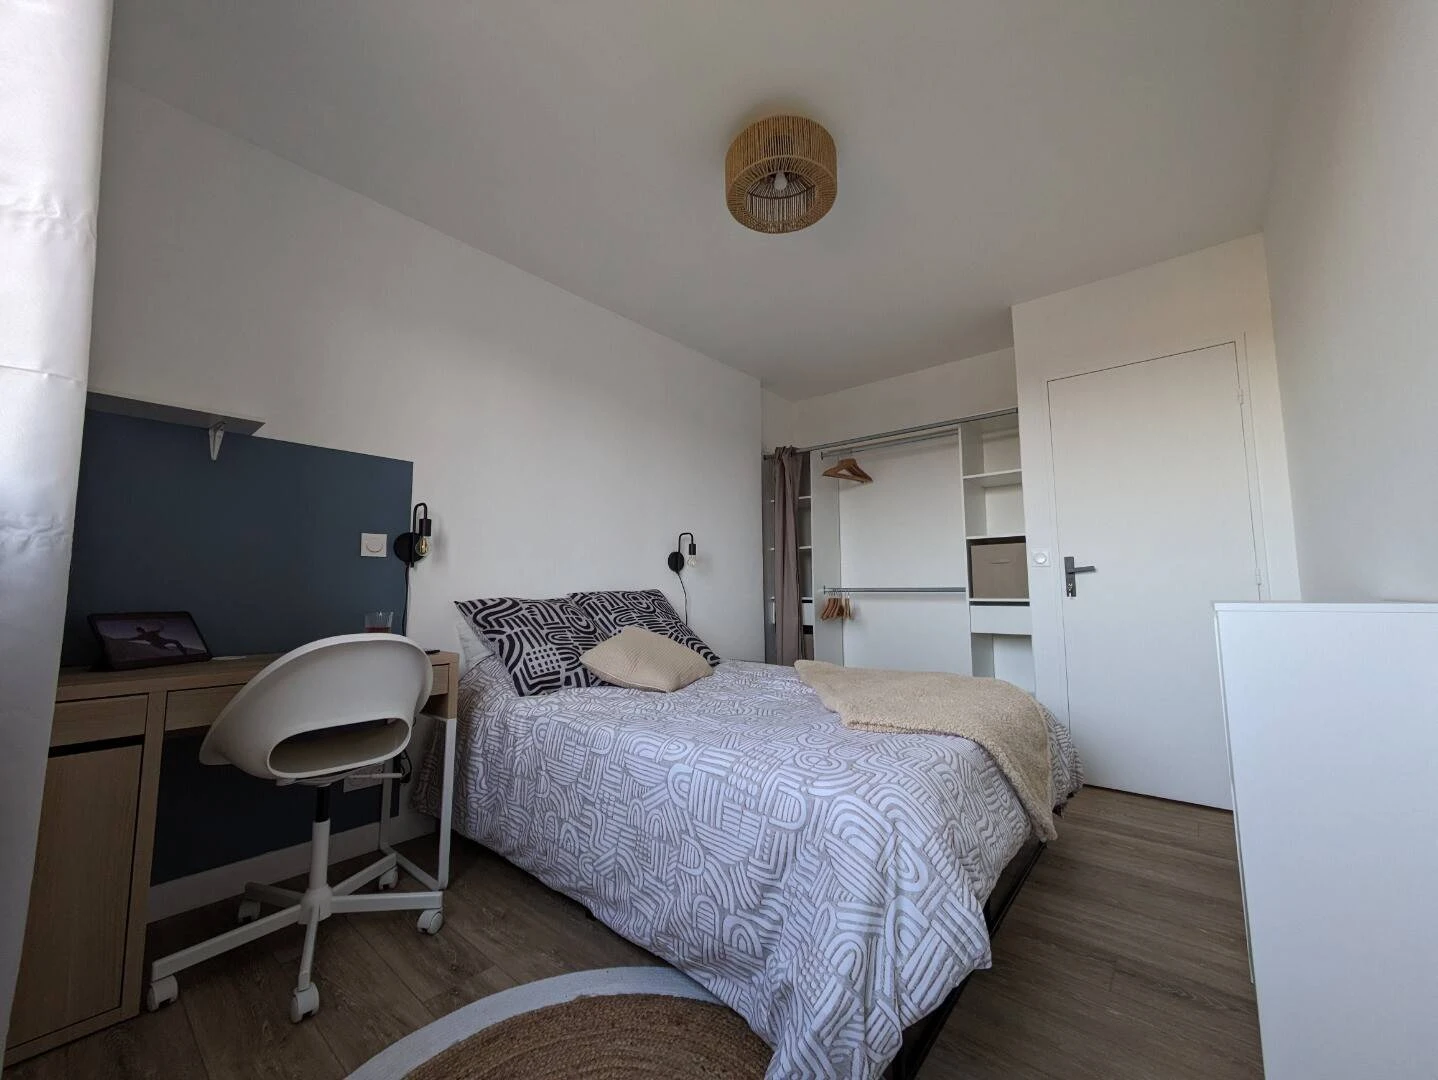 Renting rooms by the month in Le Mans